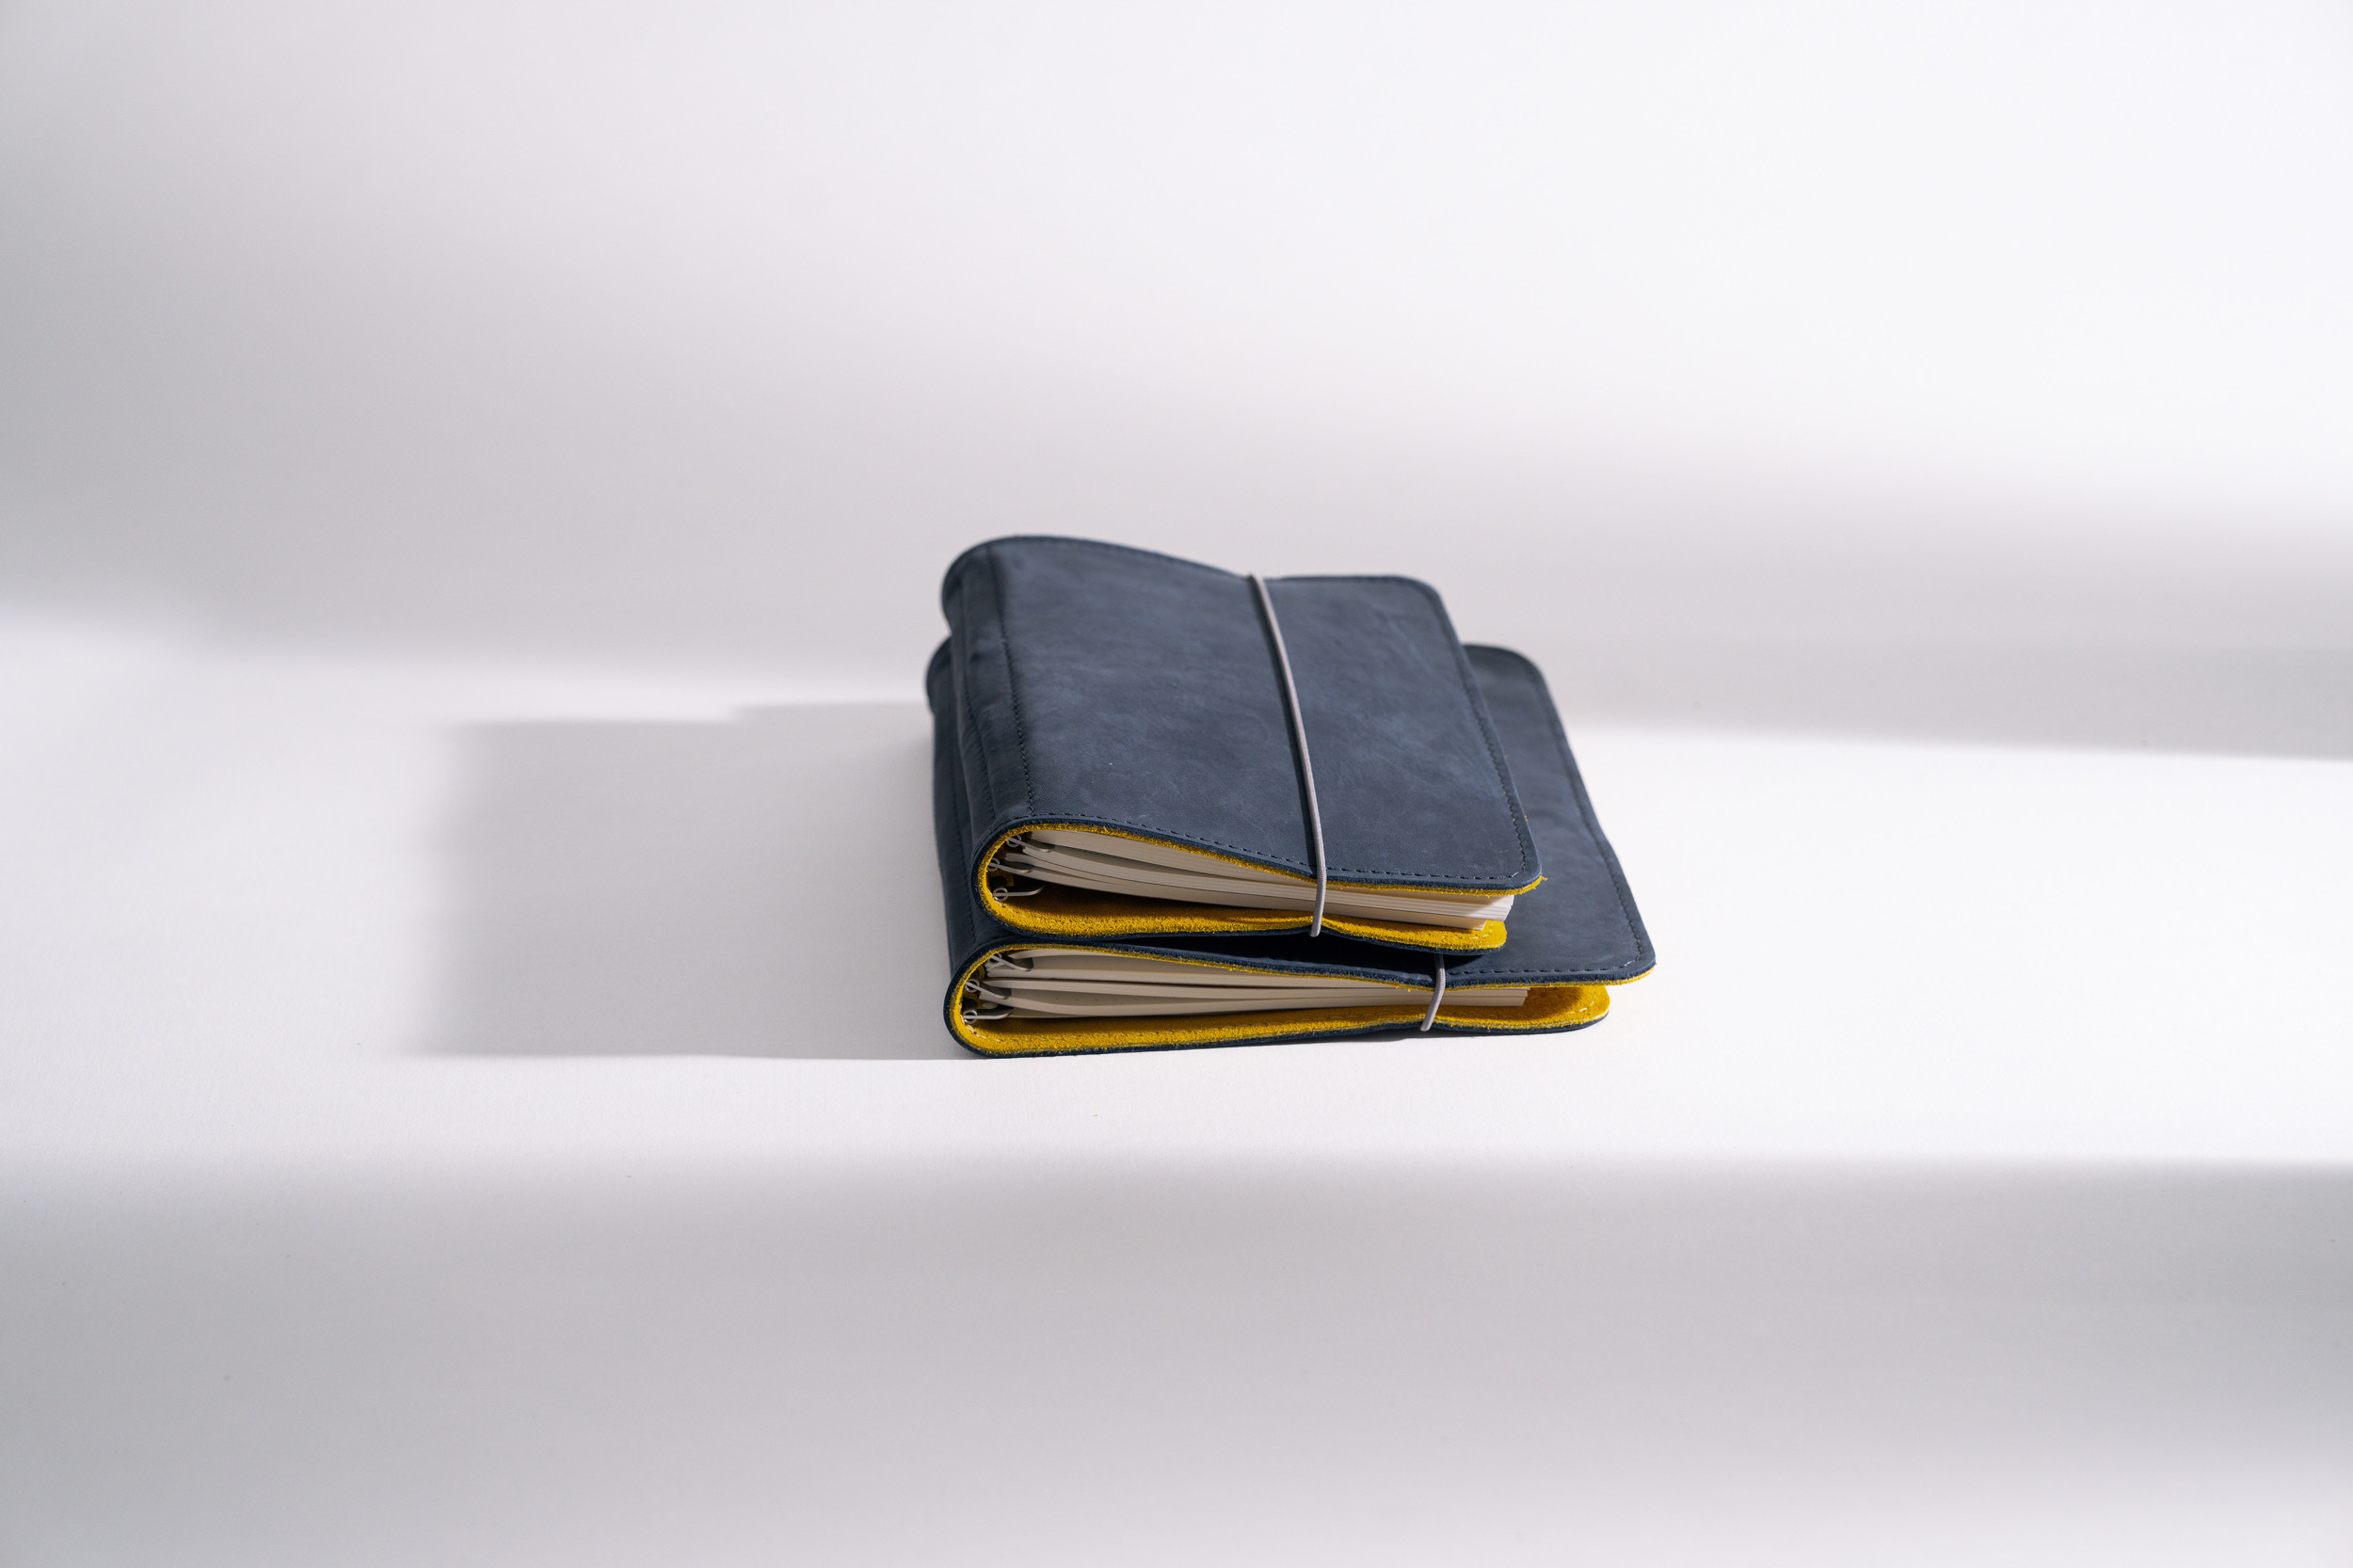 ROTERFADEN Organizer  SO_22 – Versatile design for B6 and M formats with 'Blue Angel' certified leather and elastic closure